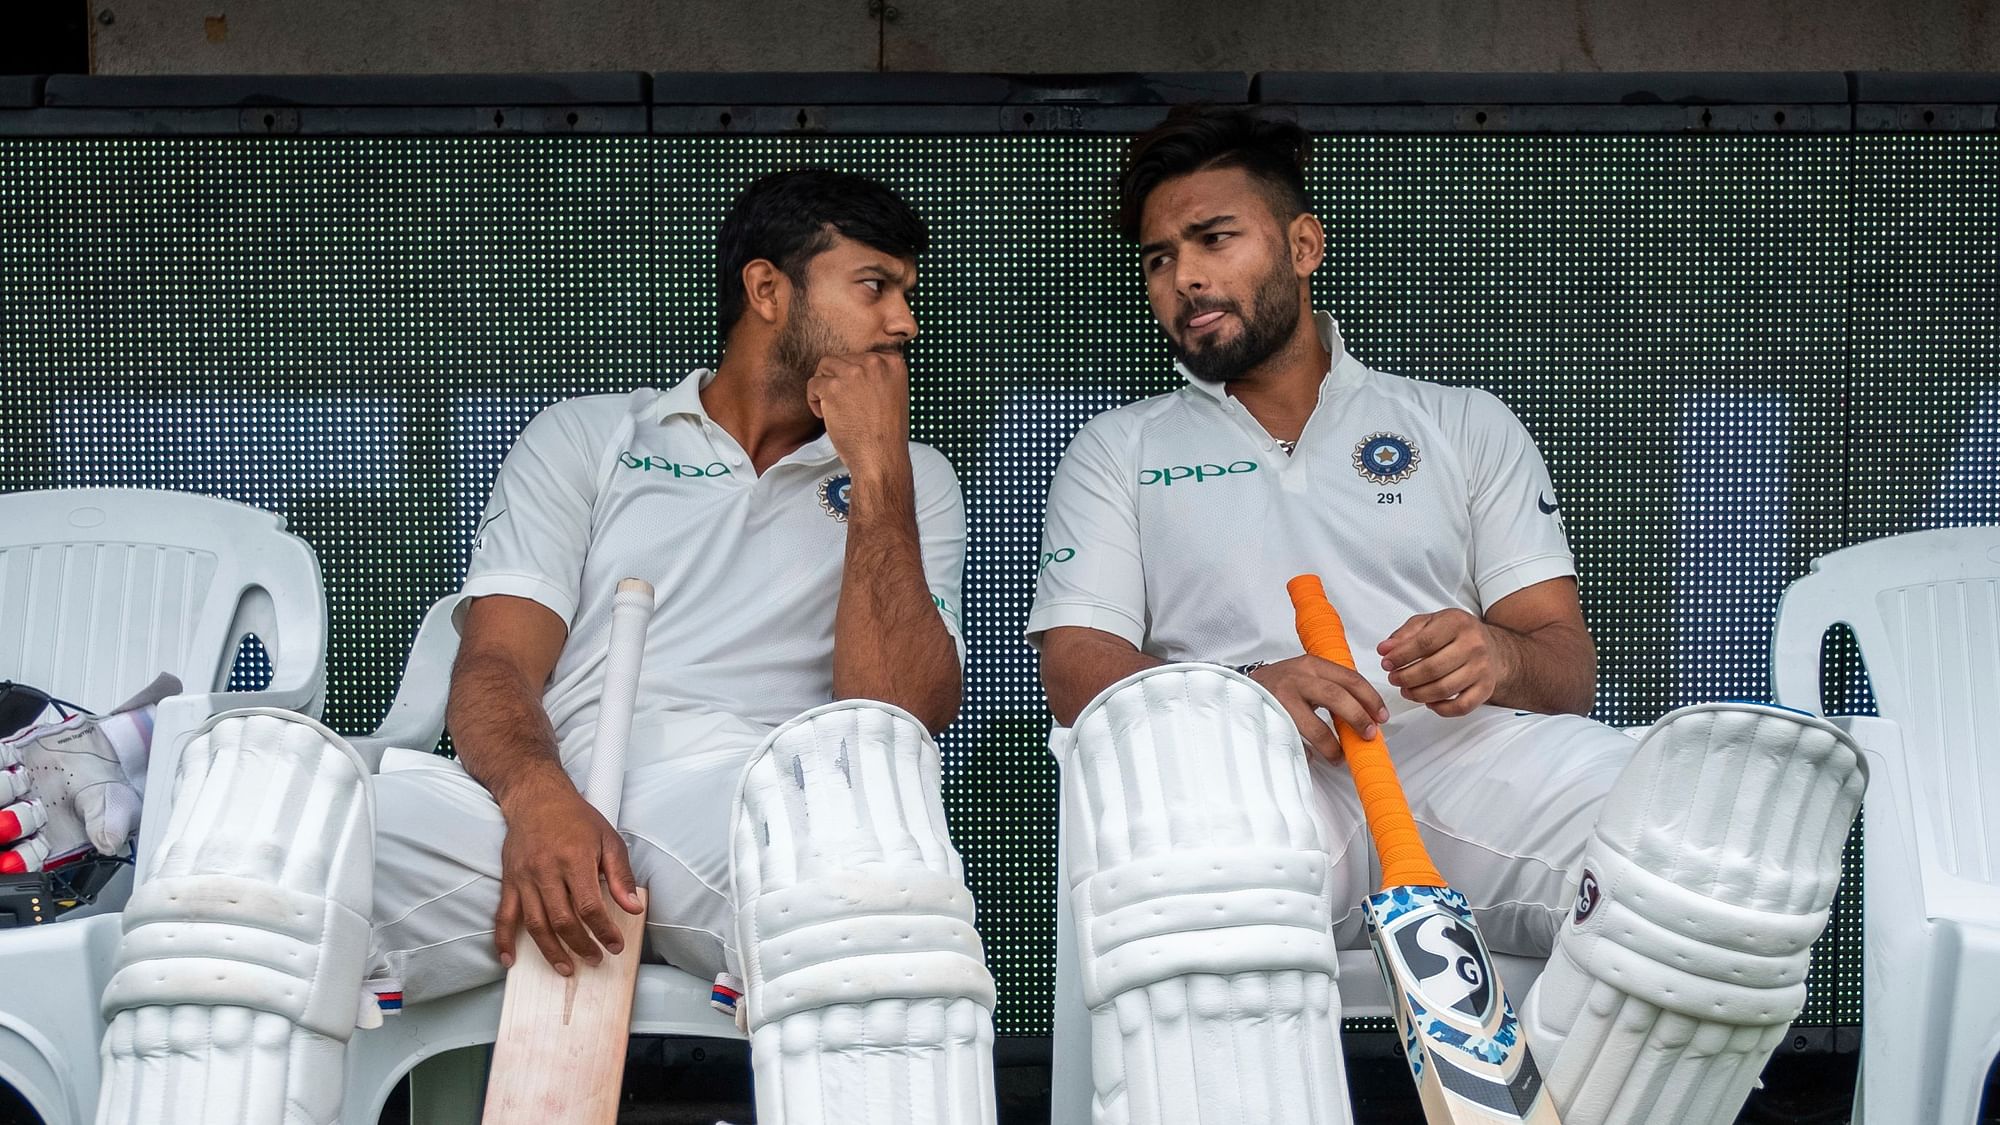 Mayank Agarwal cementing his place in the team and Rishabh Pant faltering under pressure is a tale of contrasts among the two cricketers trying to cement their spot in the Indian team.